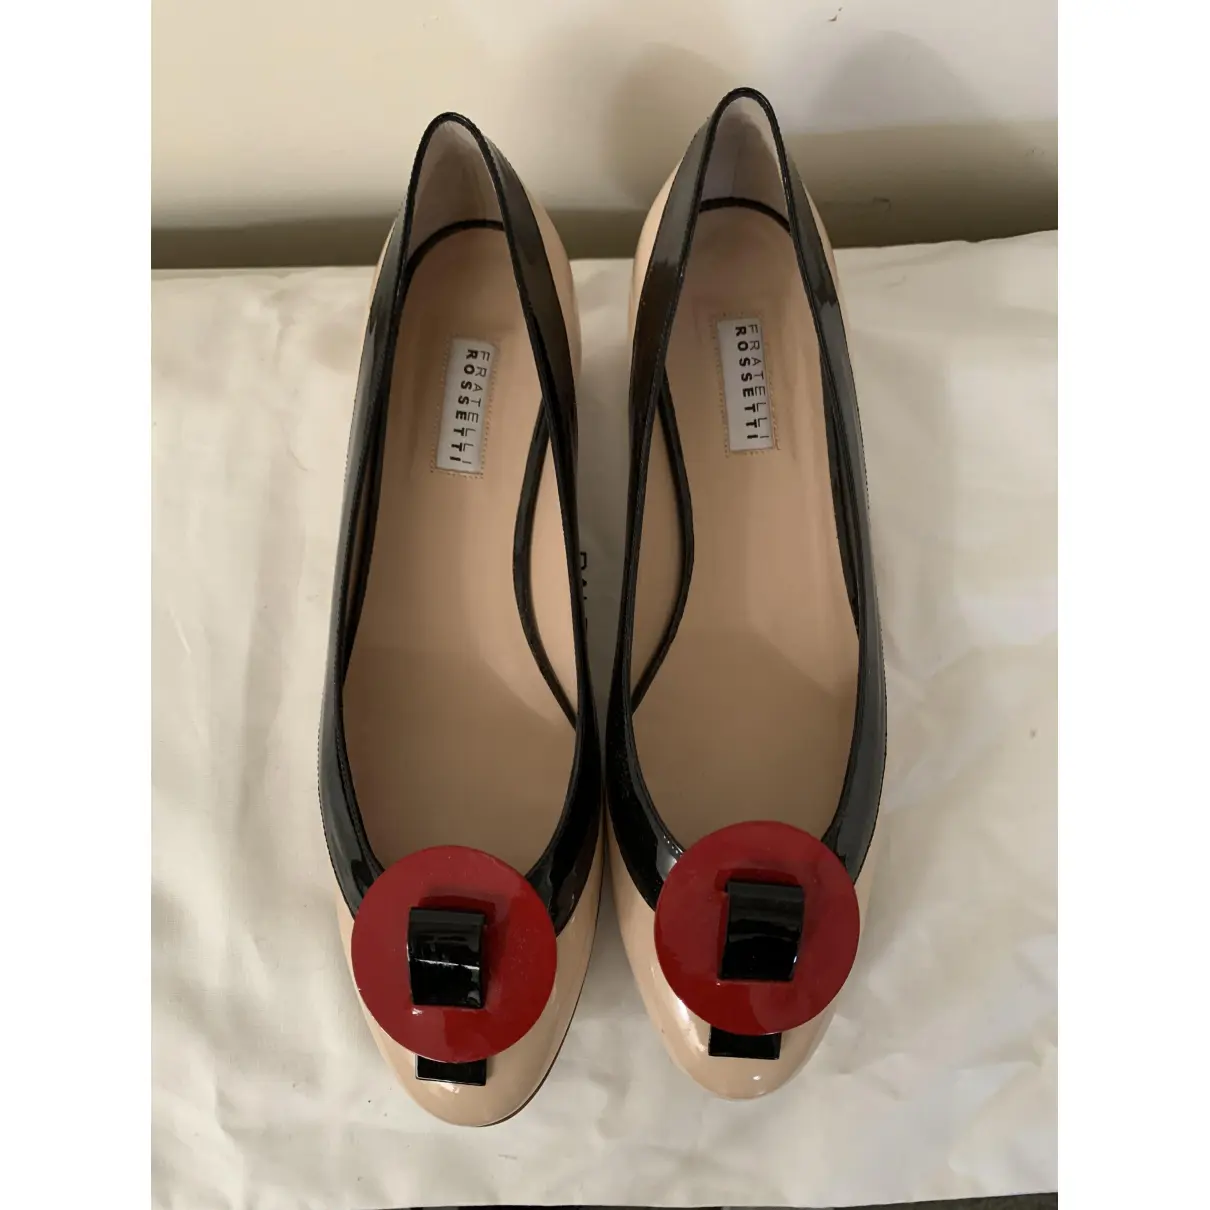 Buy Fratelli Rossetti Patent leather ballet flats online